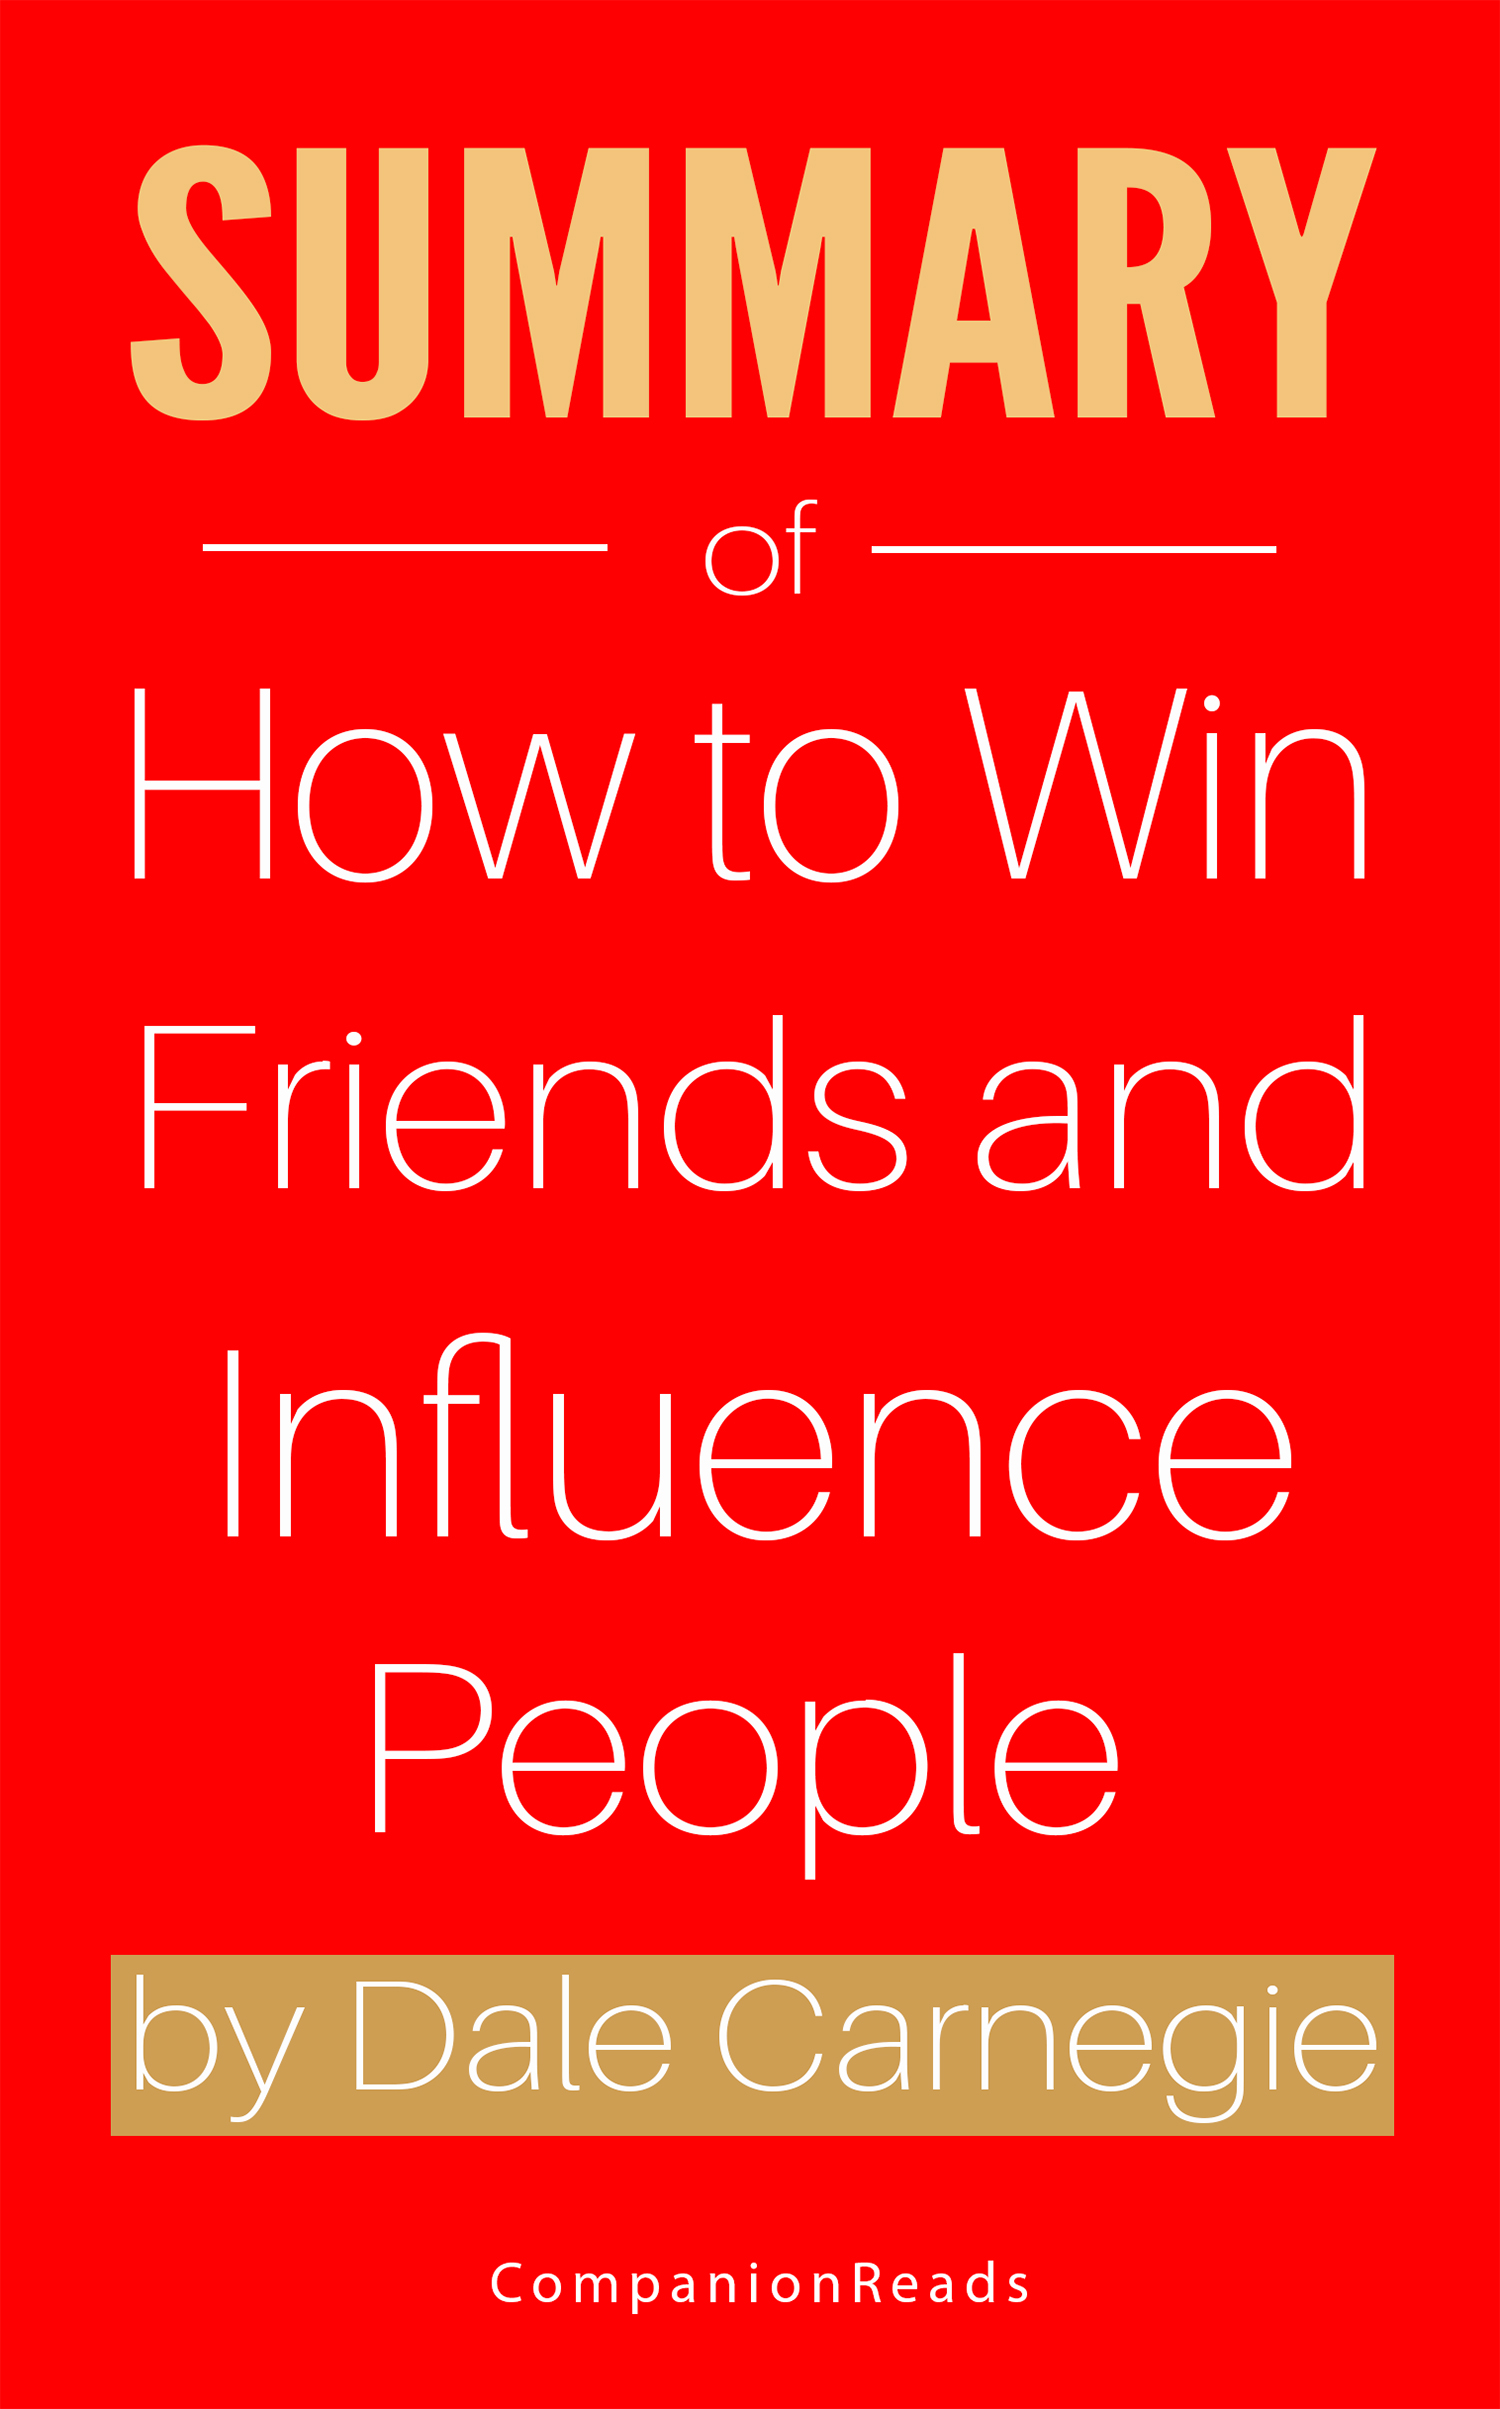 FREE: Summary of How To Win Friends and Influence People by CompanionReads Summary